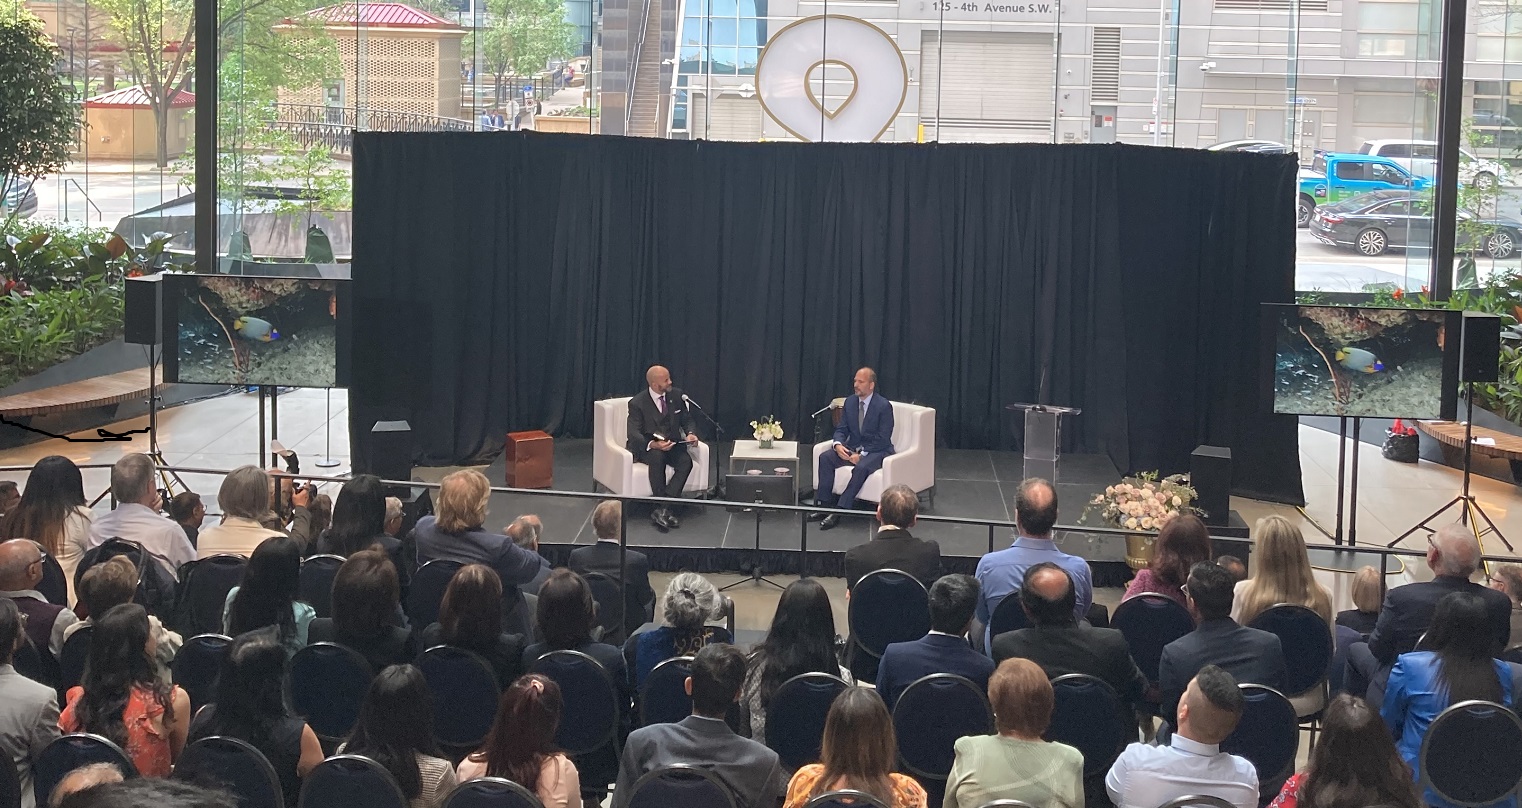 University of Calgary's Chancellor has a chat with Prince Hussain Aga Khan during a special event hosted by the University at The Ampersand to celebrate the Prince's exhibition The Living Sea - Fragile Beauty that continues at Glenbow at the Edison until May 21, 2023.